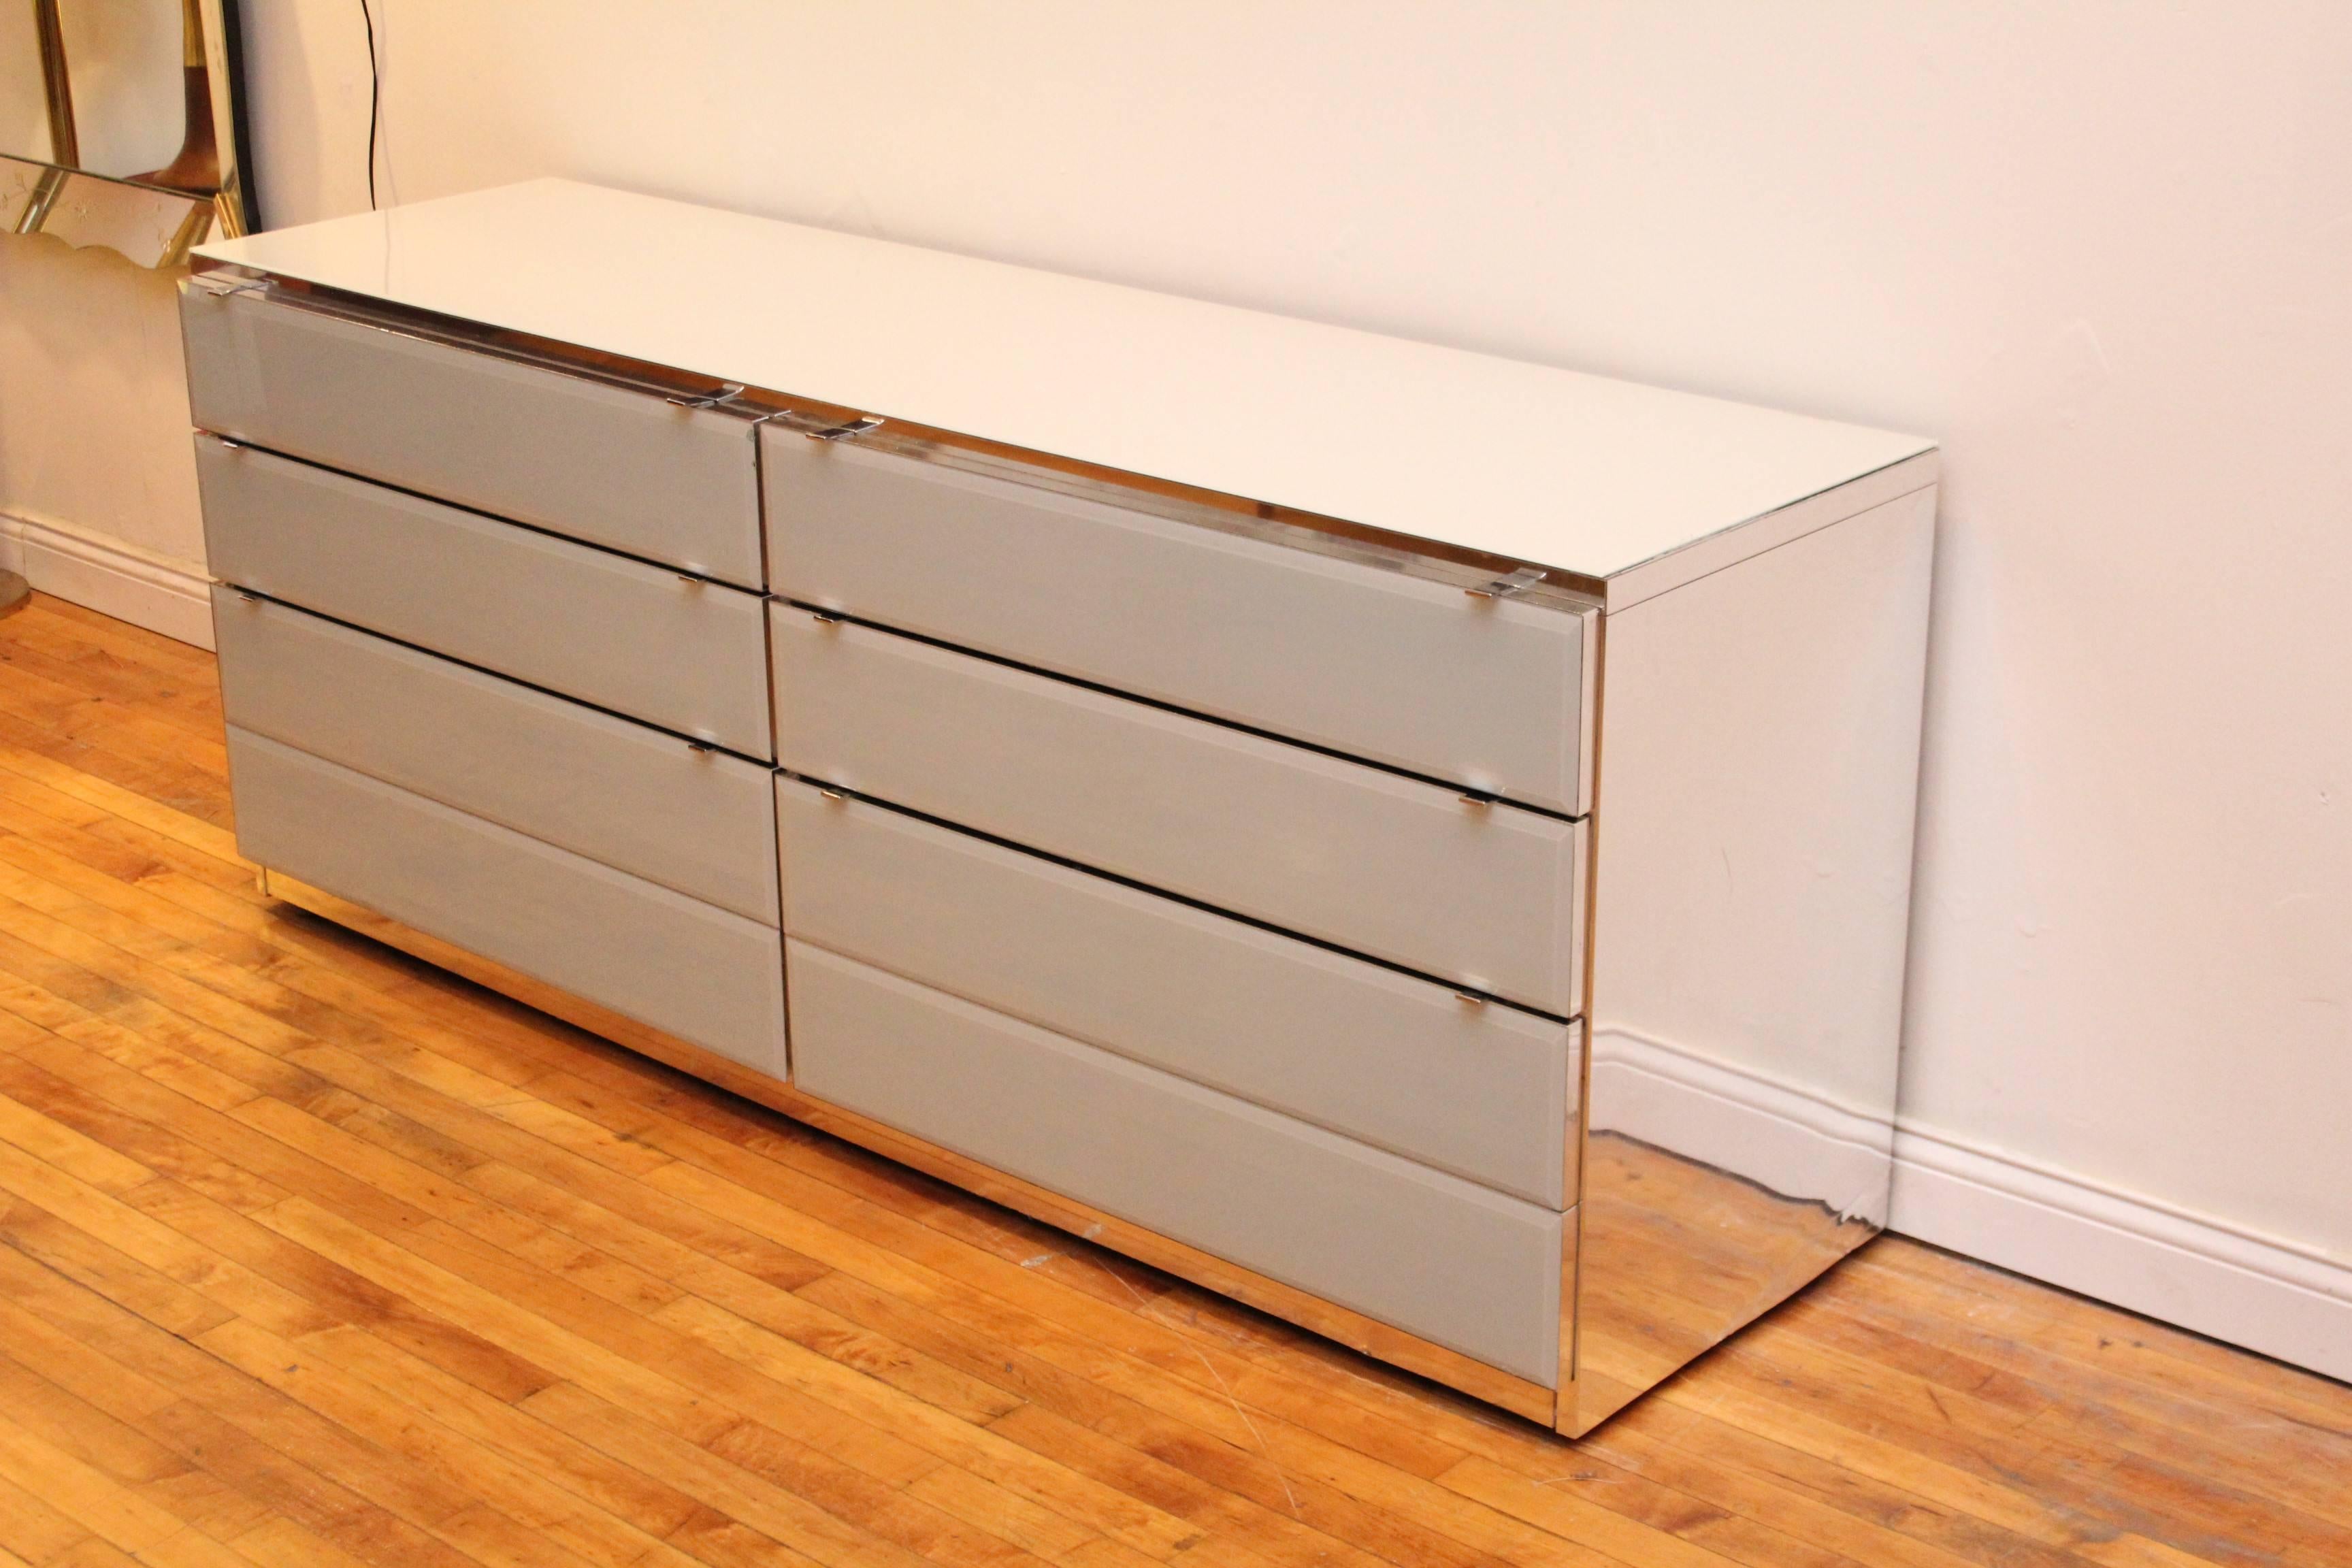 Polished Six-Drawer Double Ello Chrome and Glass Dresser Drawers